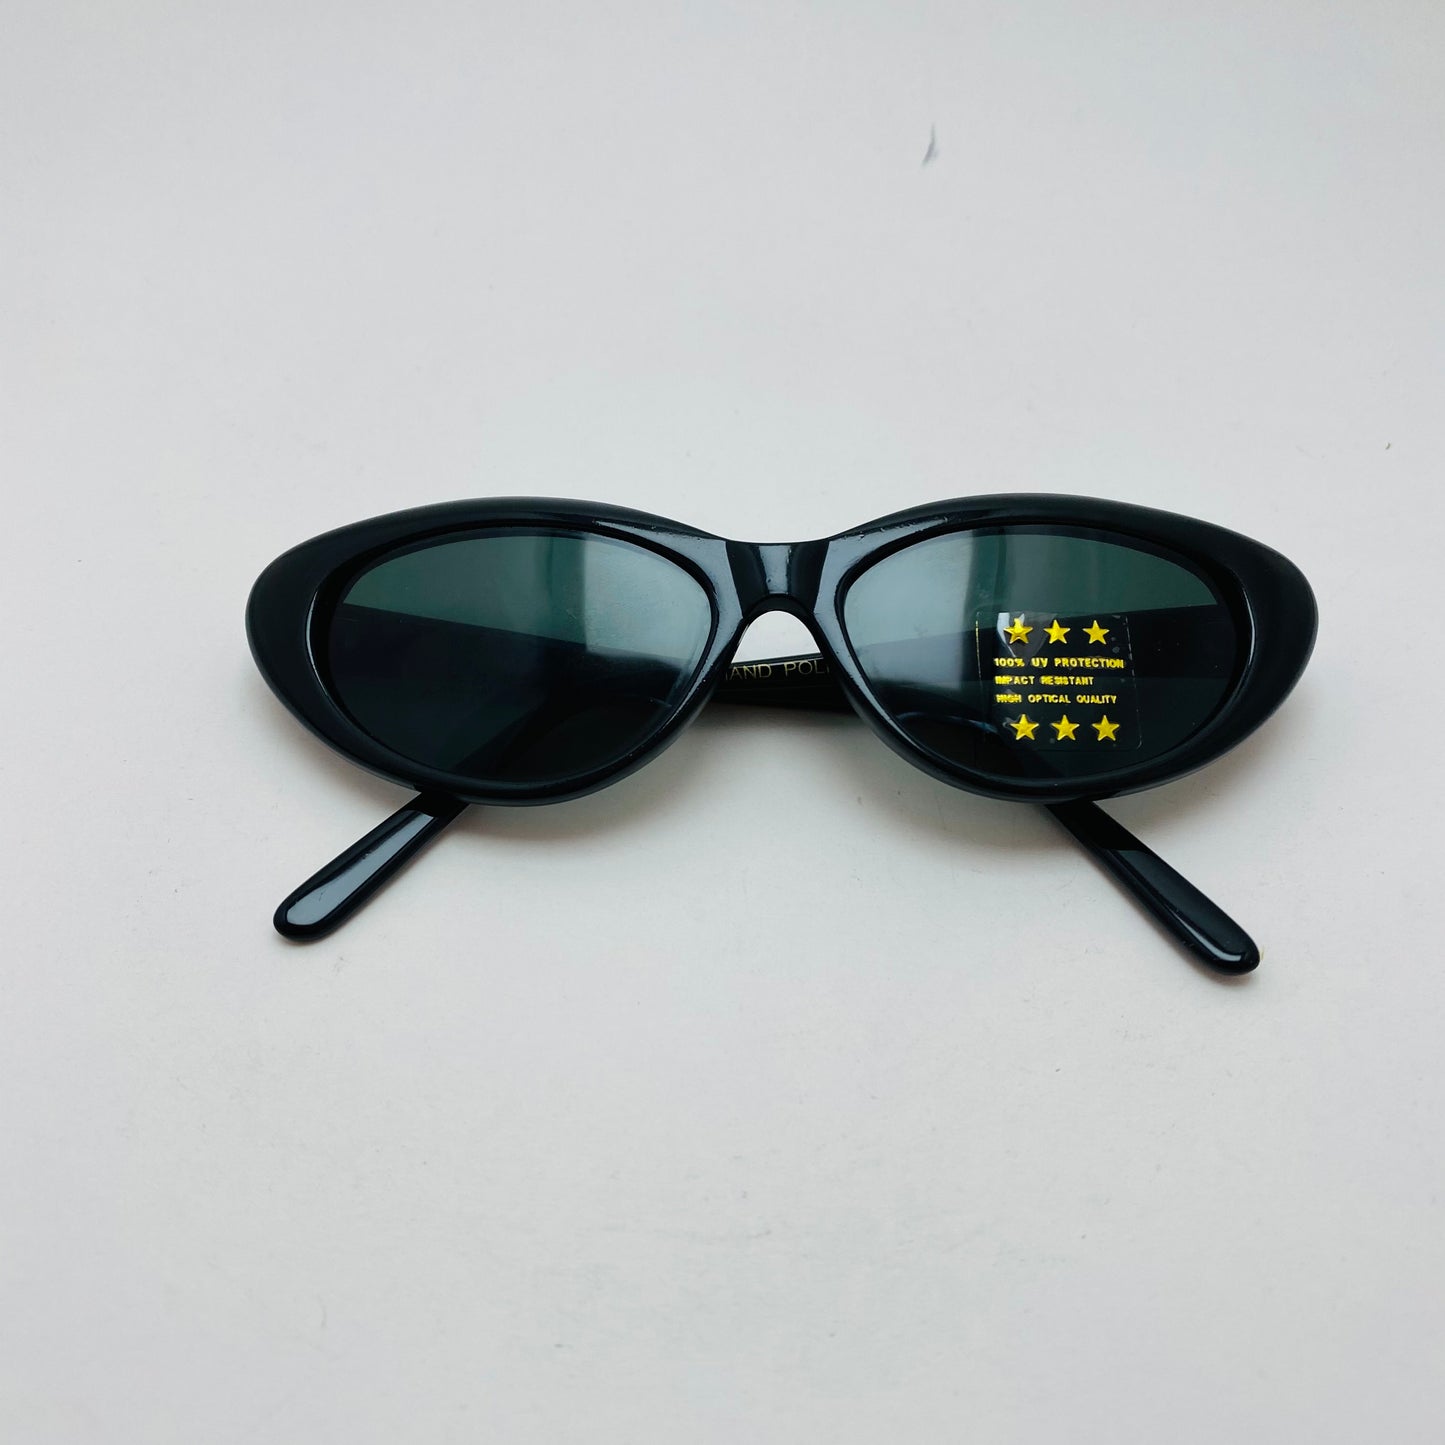 1990s style vintage black triangle frame sunglasses with grey lens 